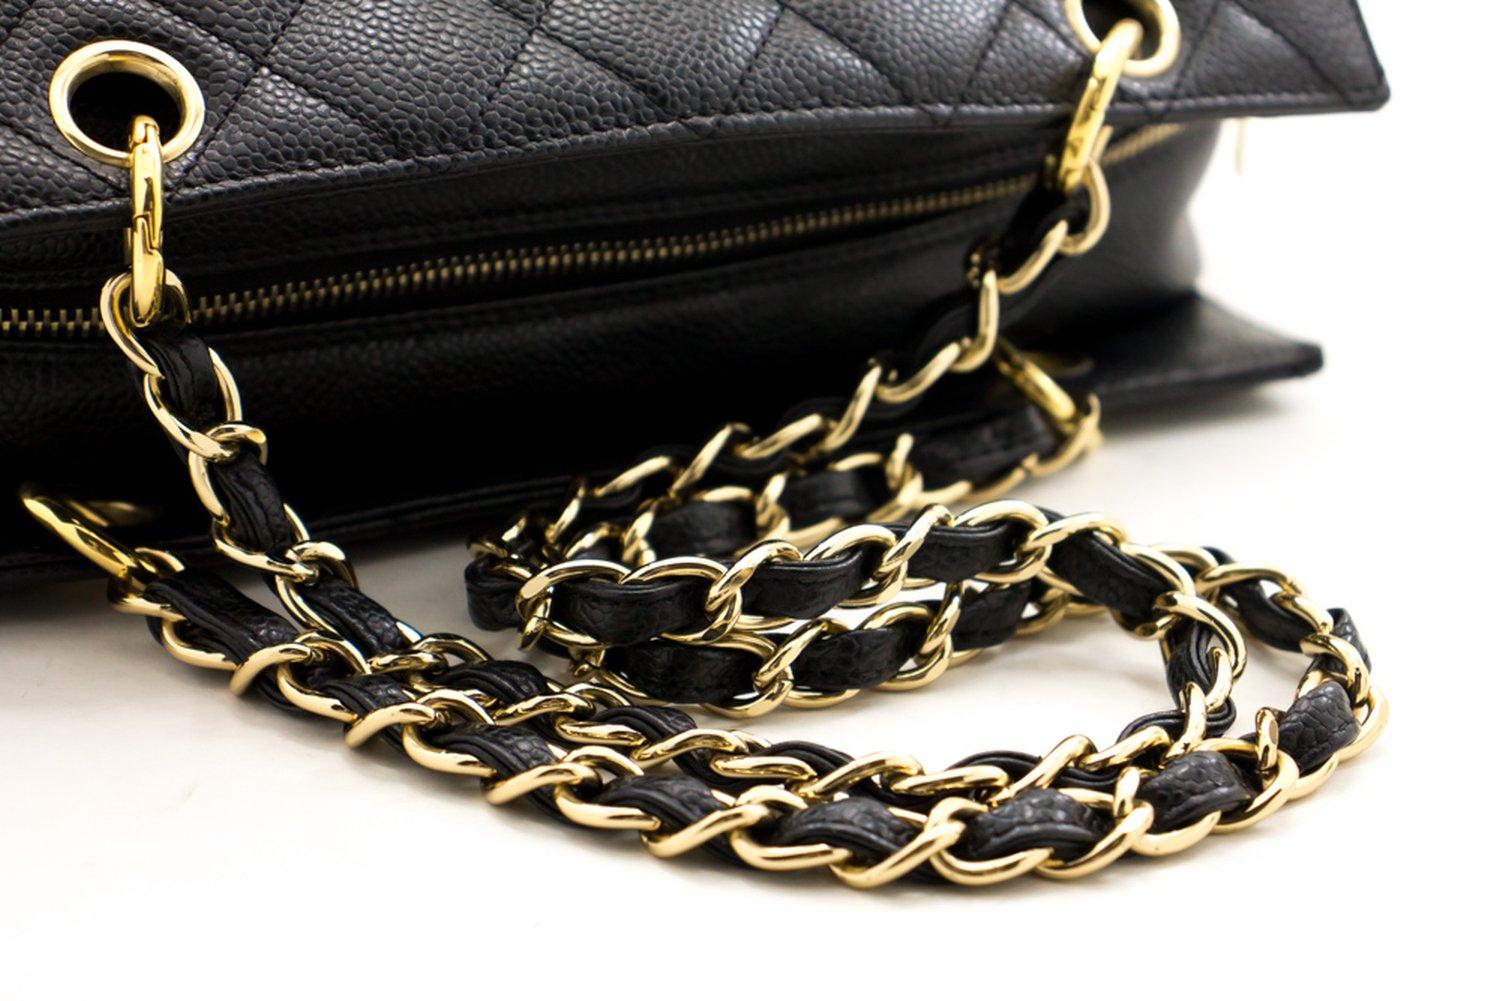 CHANEL Caviar Chain Shoulder Shopping Tote Bag Black Quilted Purse 5